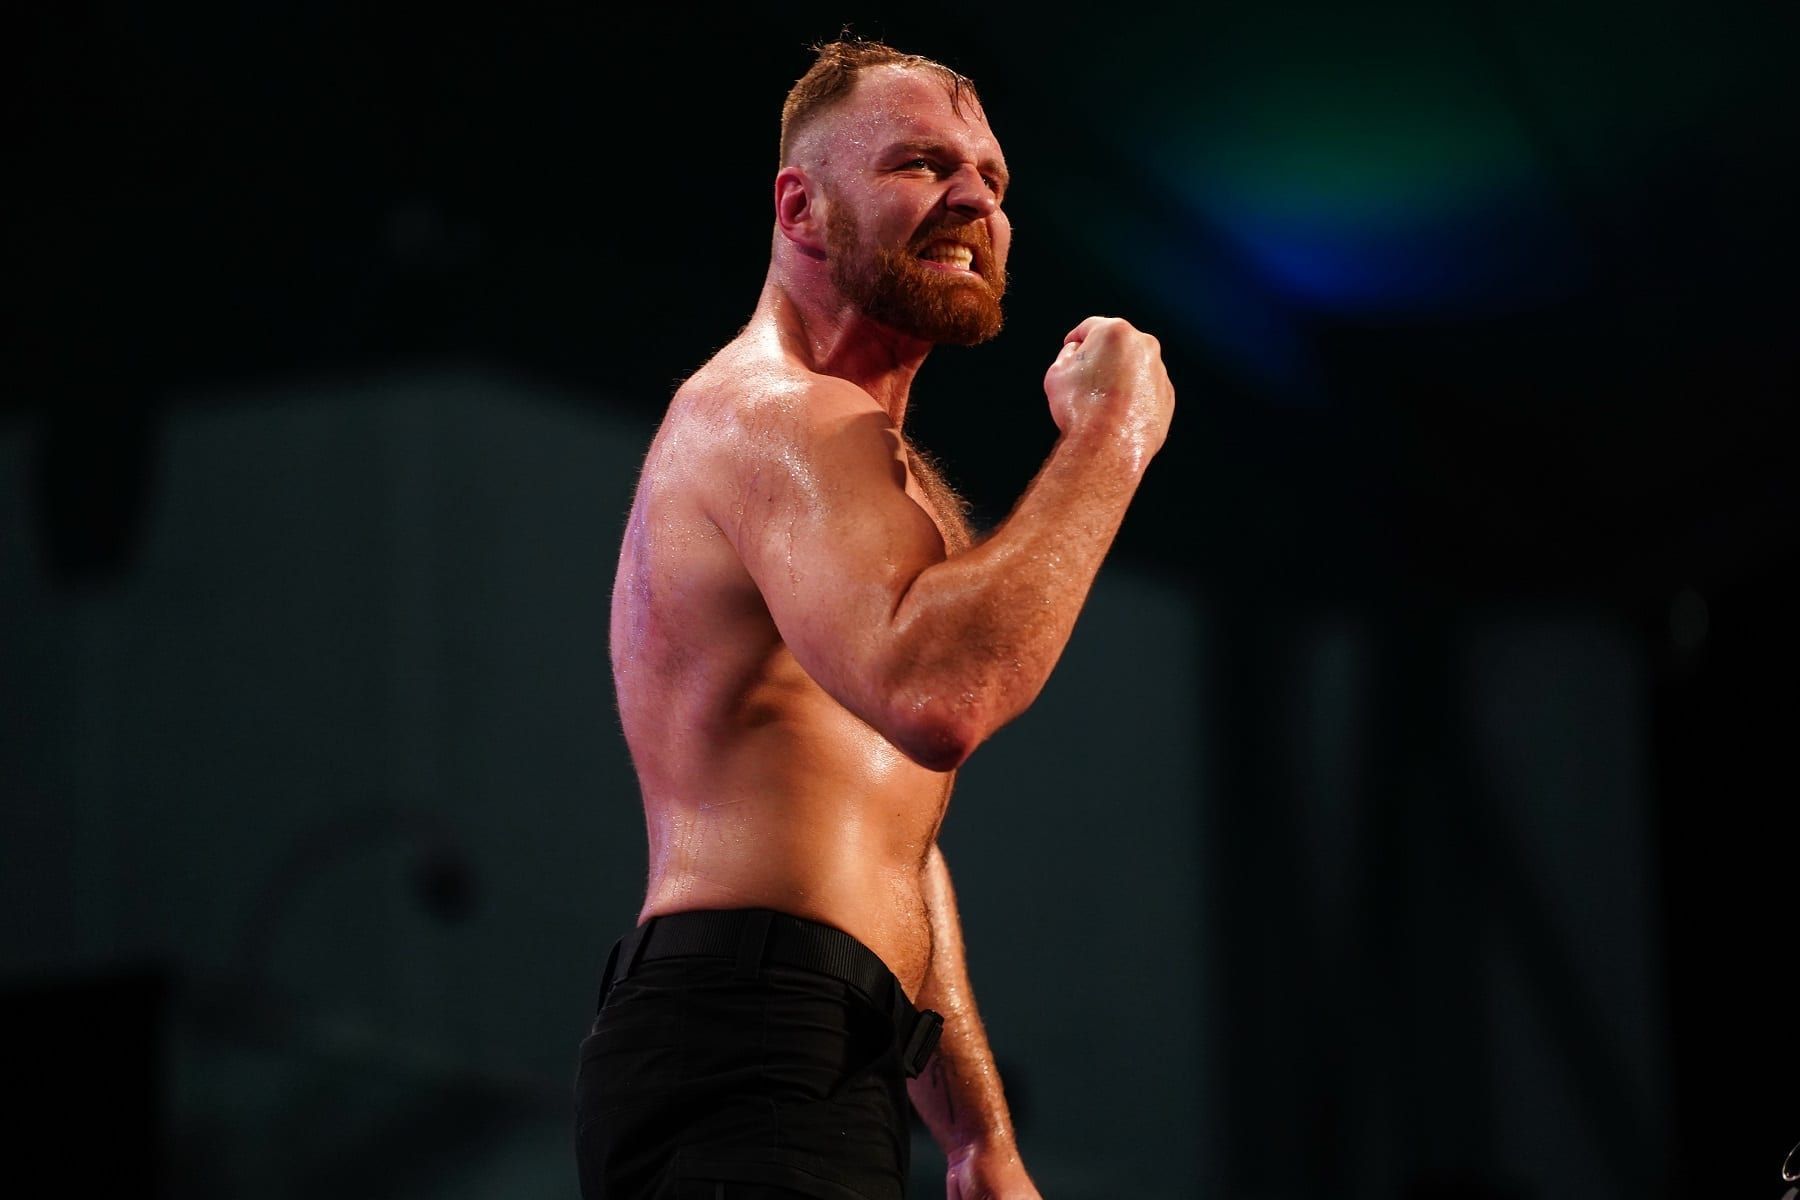 Jon Moxley has found new life in pro wrestling since leaving WWE.